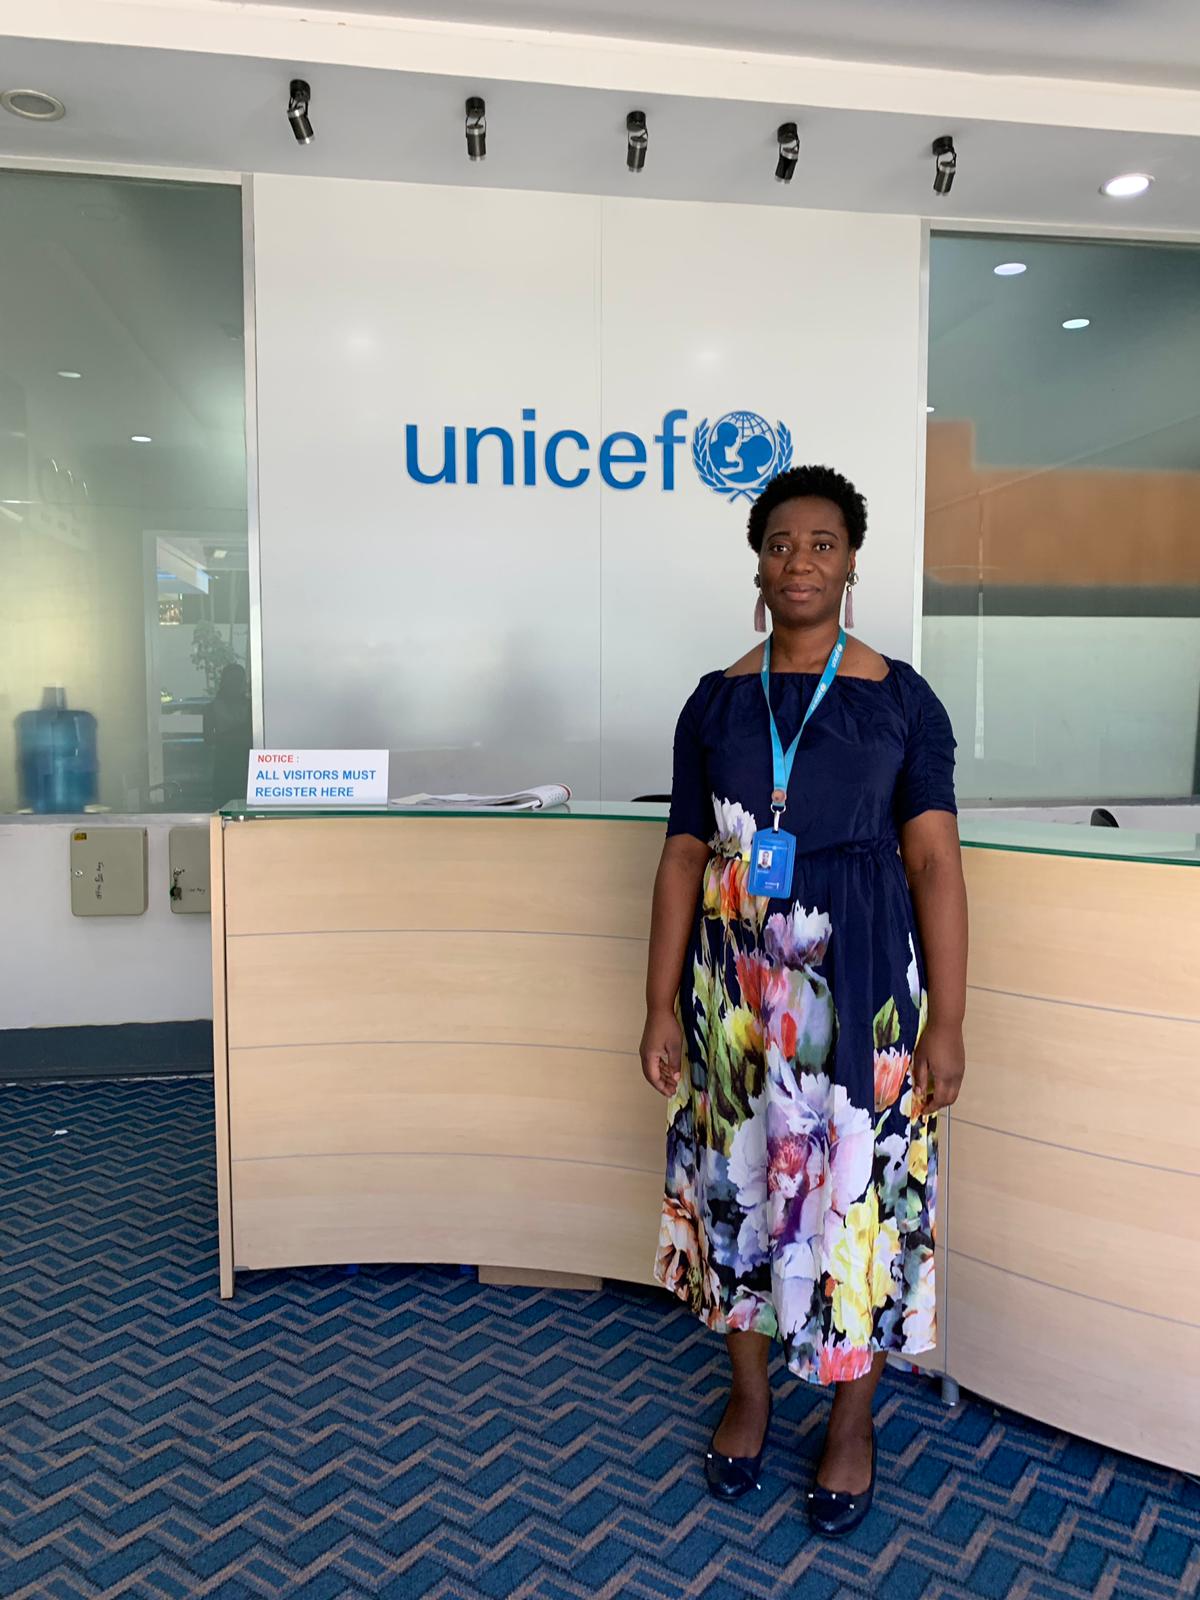 Marie Djeni standing in front of a reception desk and wall with the UNICEF logo.